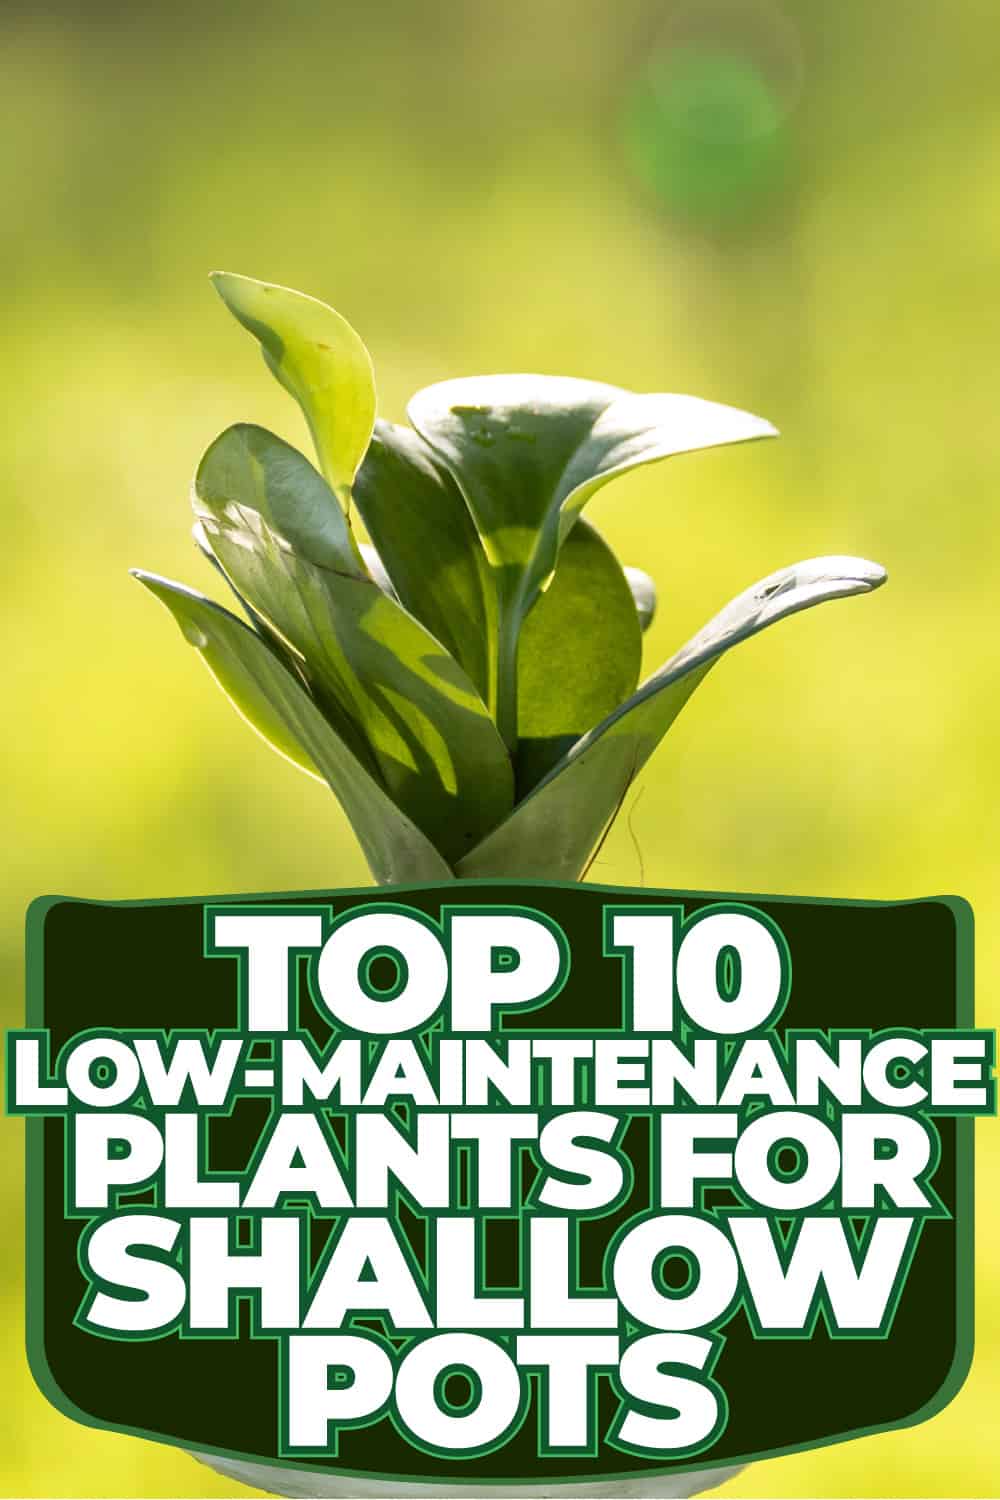 Top 10 Low-Maintenance Plants for Shallow Pots: Perfect for Small Spaces!